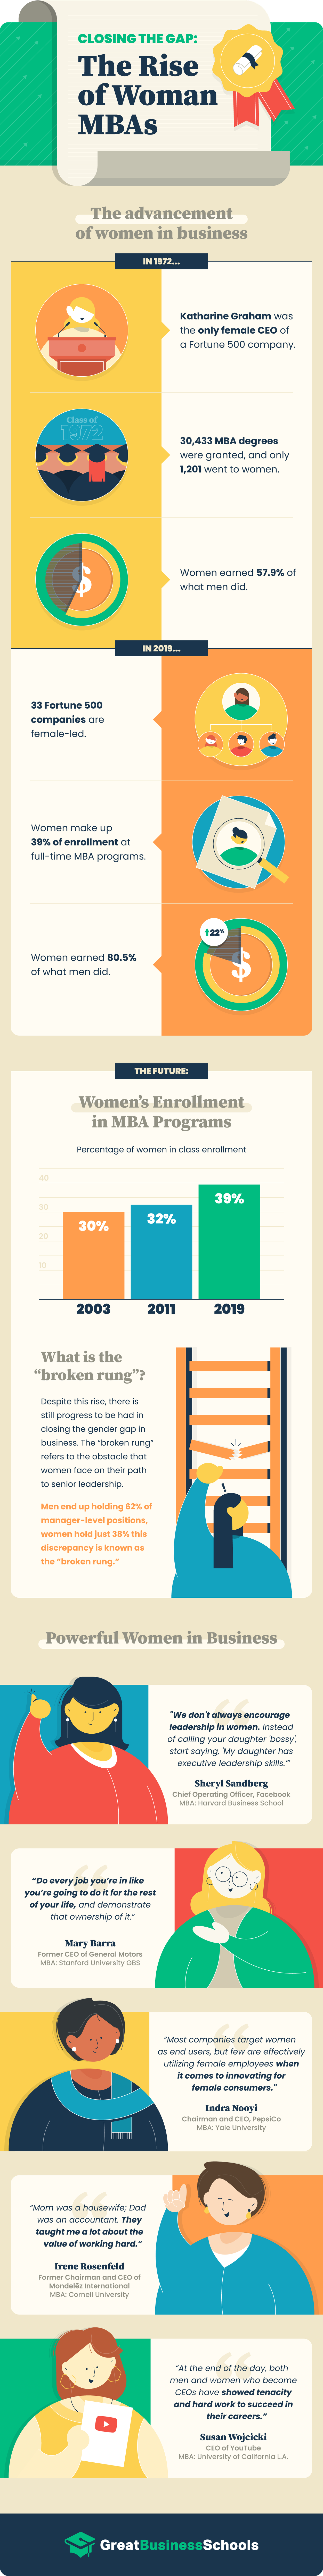 Rise of Women MBAs